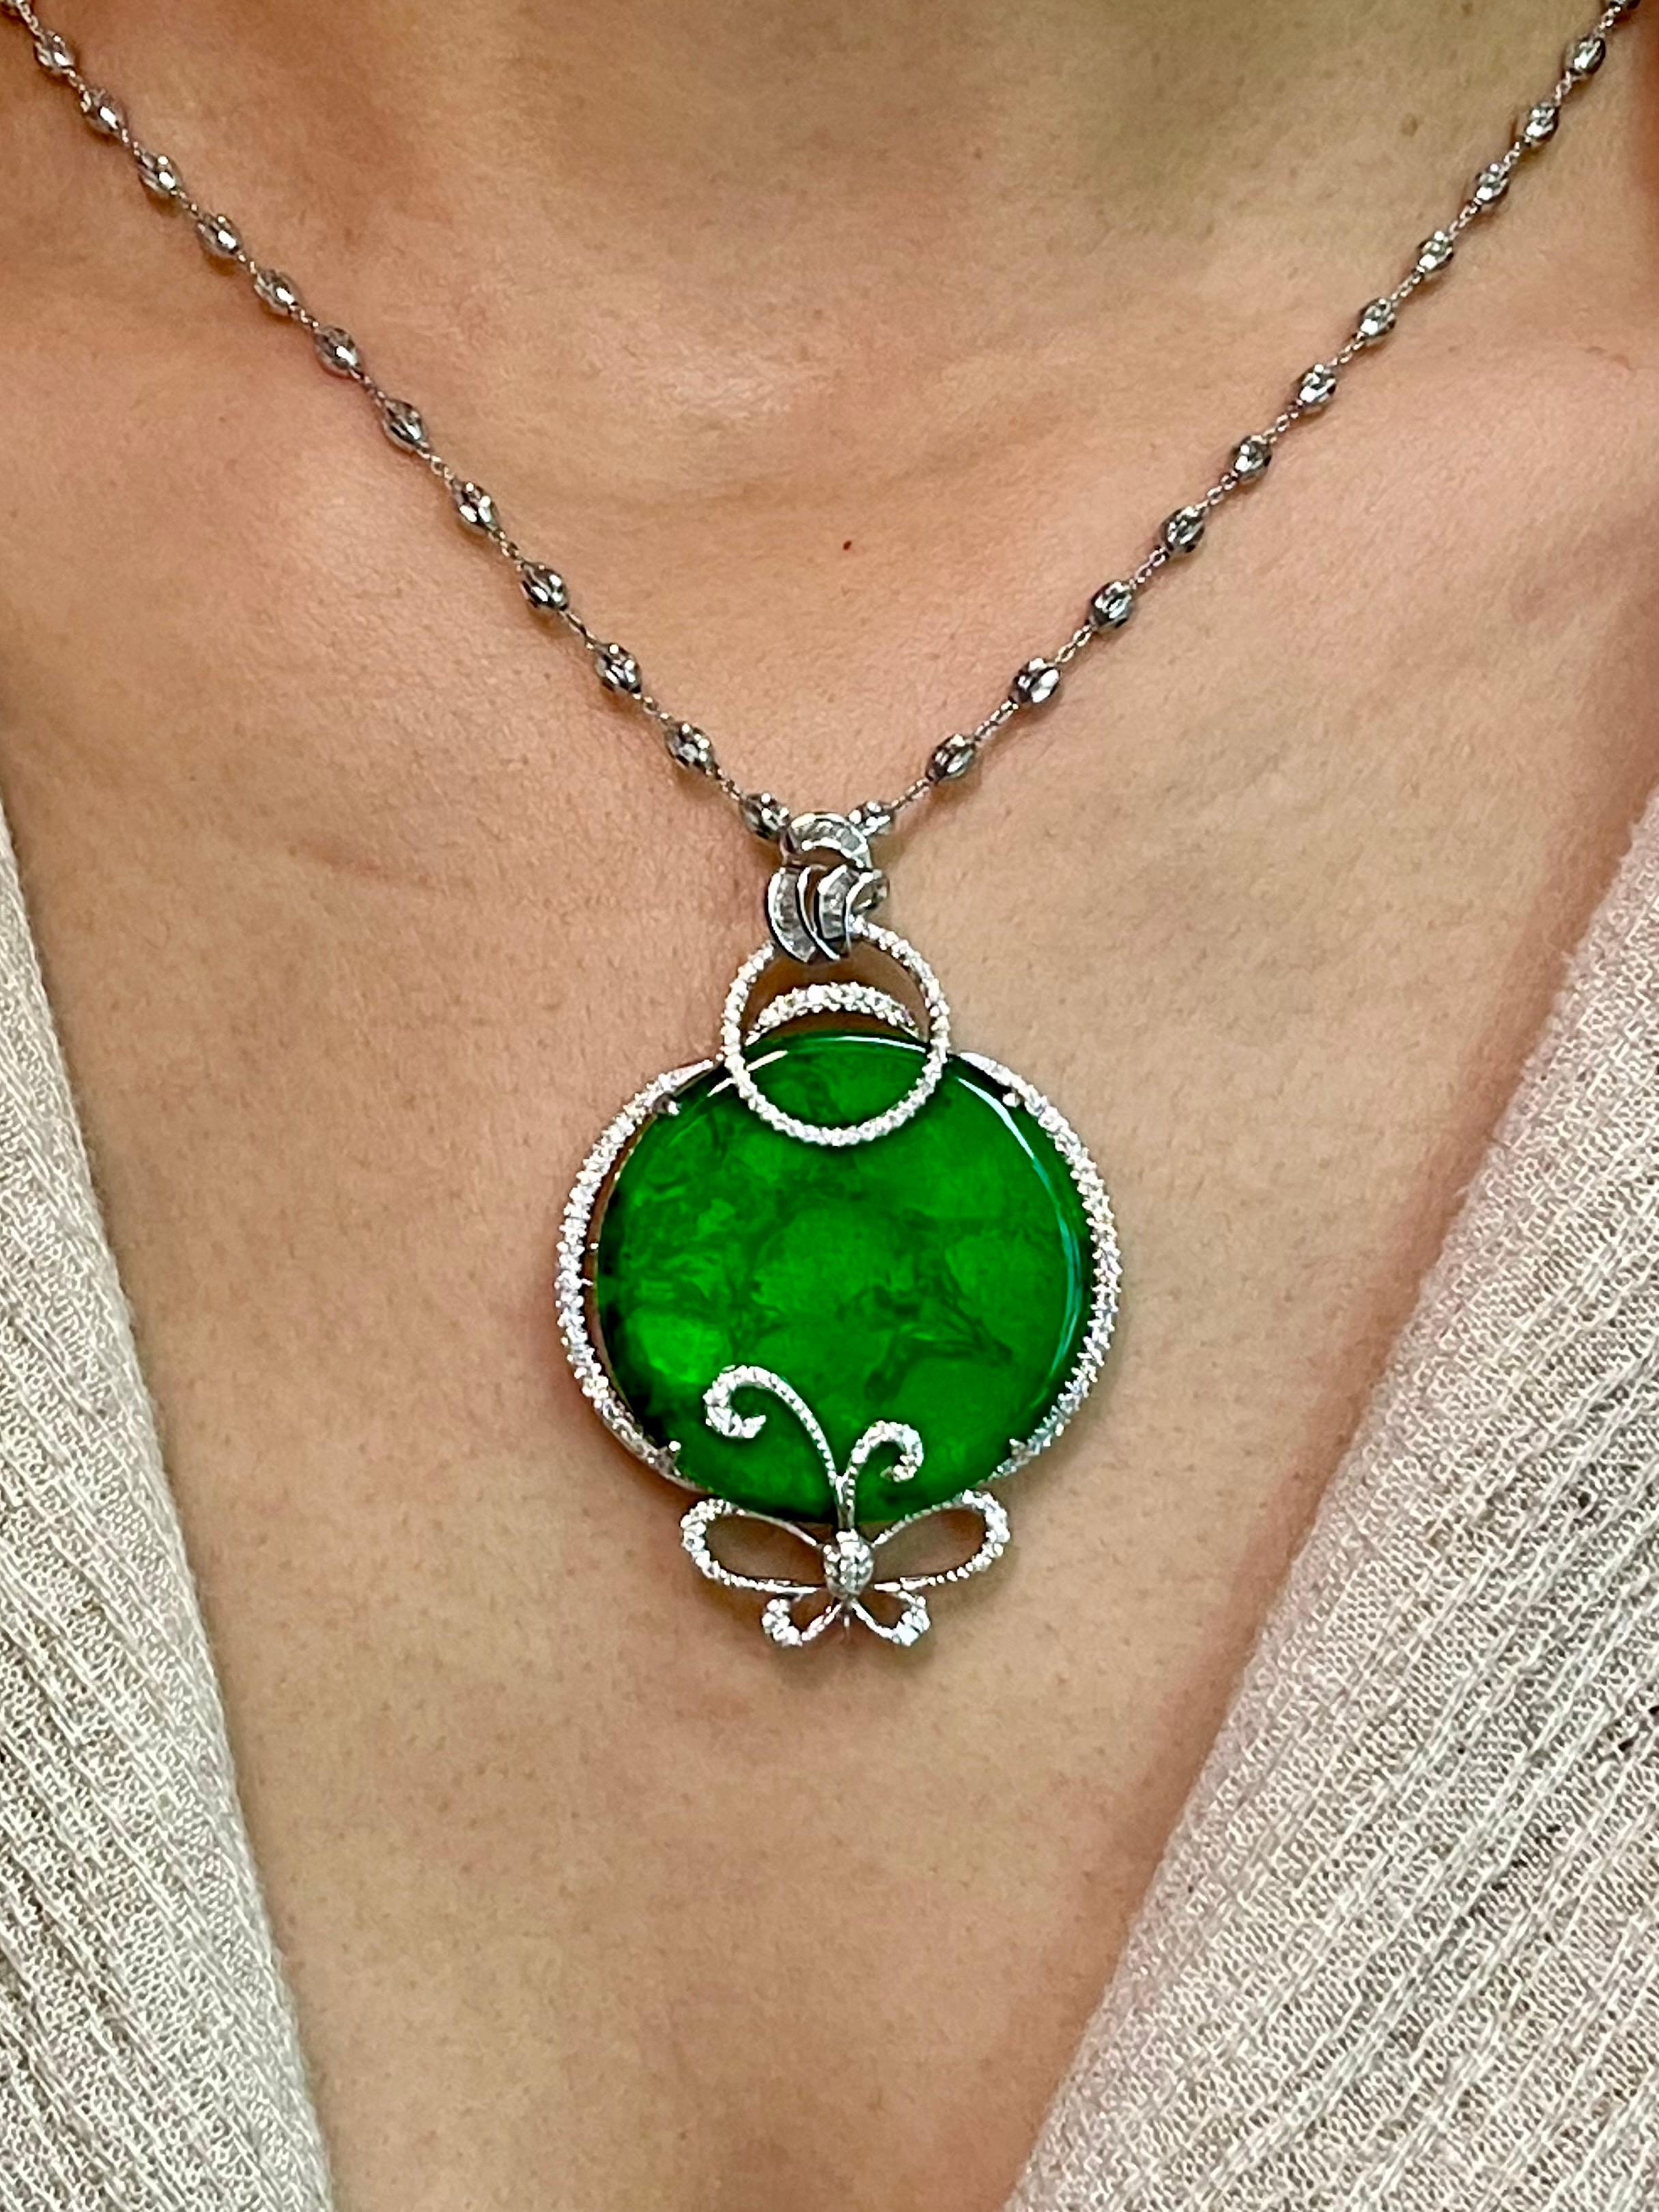 Please check out the HD video! This is a collector's item! This certified natural jadeite jade has no treatment and un-enhanced. The pendant is set in 18k white gold and diamonds with a diamond butterfly motif. There are 0.71 cts of white diamonds